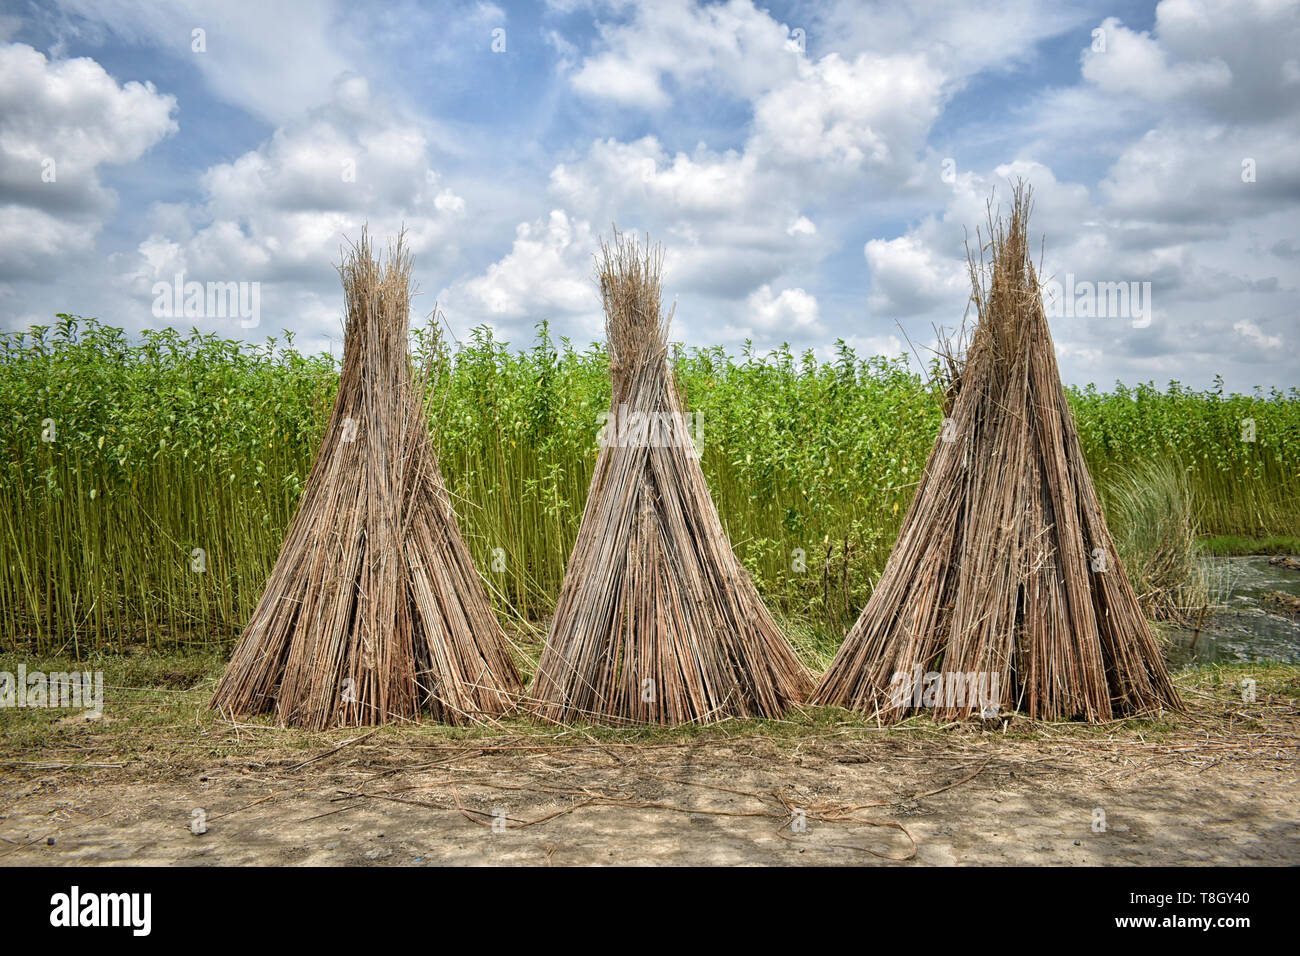 Cultivation of jute in India. Jute is one of the important natural fibers after cotton in terms of cultivation and usage. Stock Photo